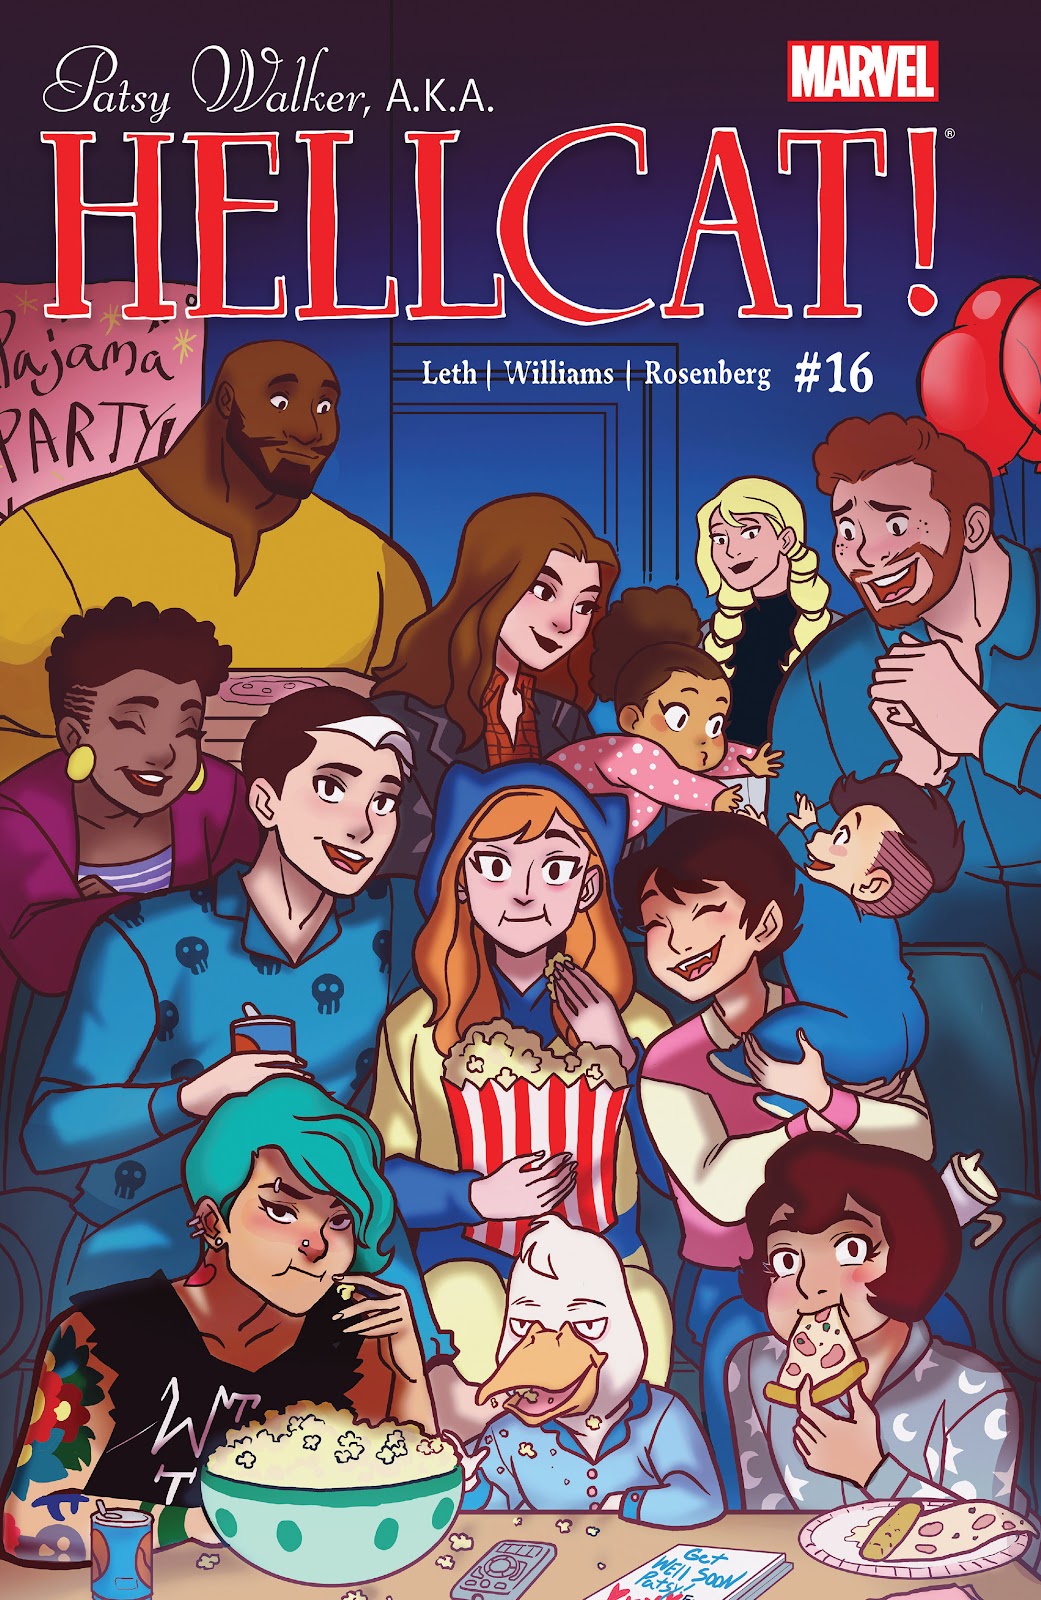 Patsy Walker, A.K.A. Hellcat! issue 16 - Page 1